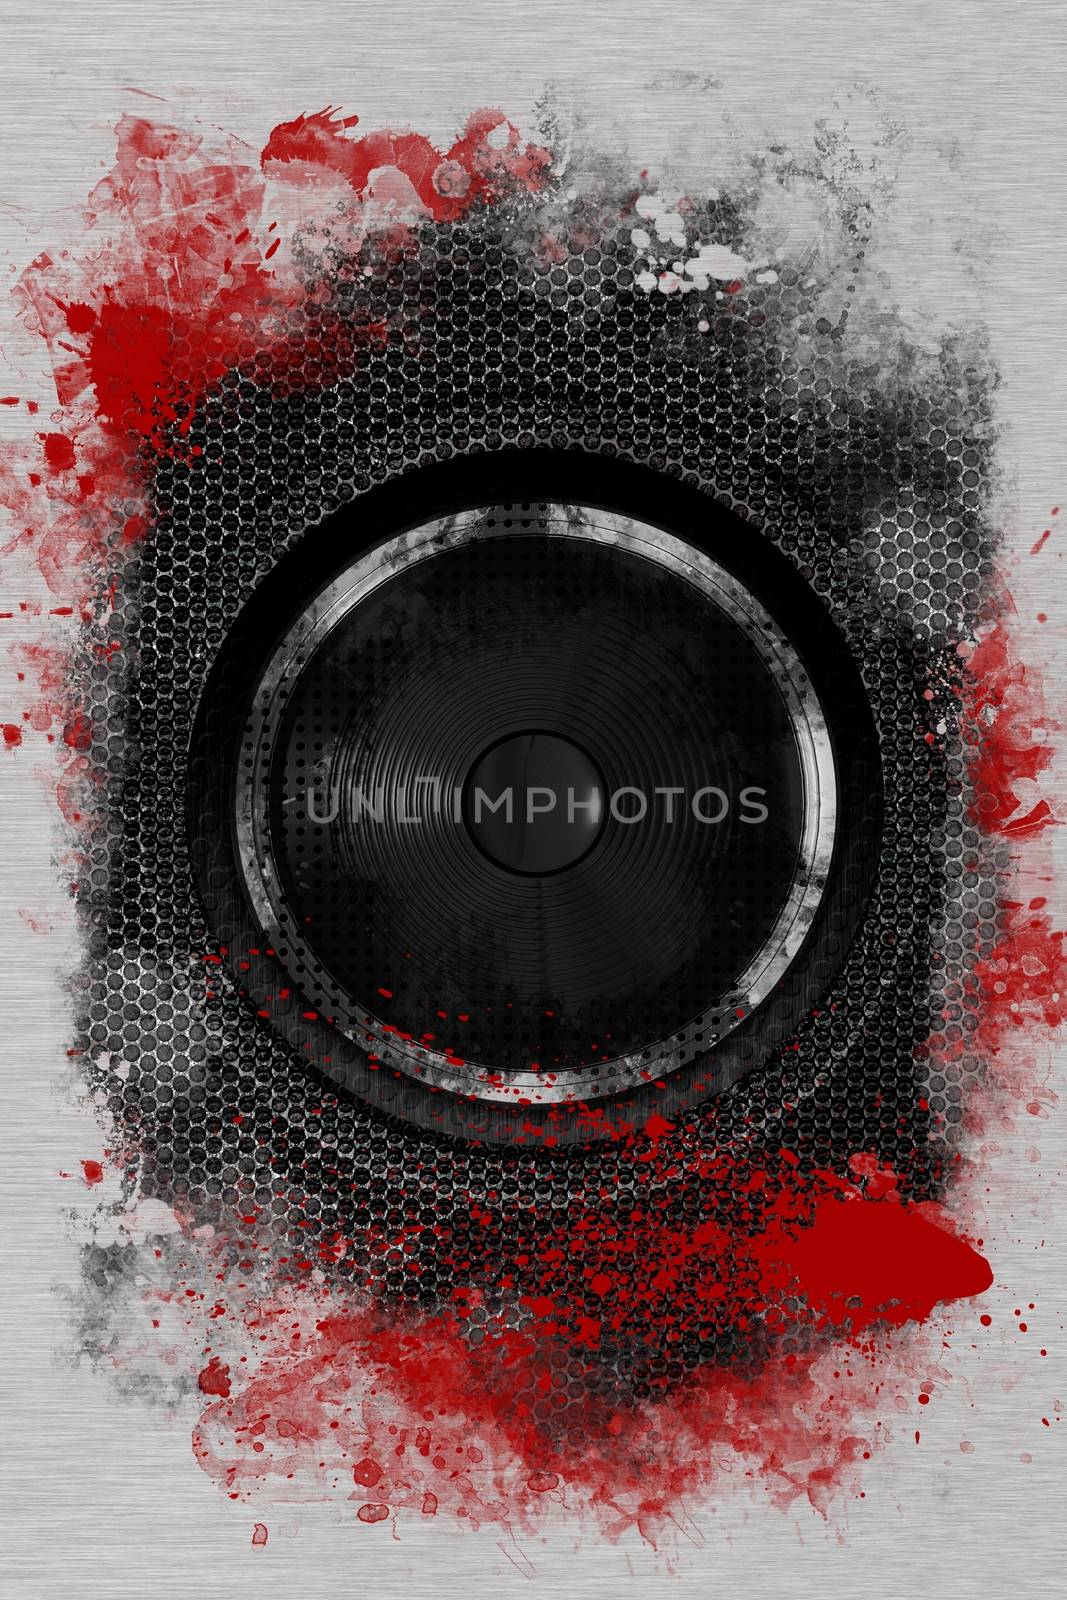 Hardcore Rock Bass Speaker. Cool Grunge Black Bass Speaker with Damaged Metal Sheets and Red Paint. Cool Background for Your Music Event Posters, Flyers and more!